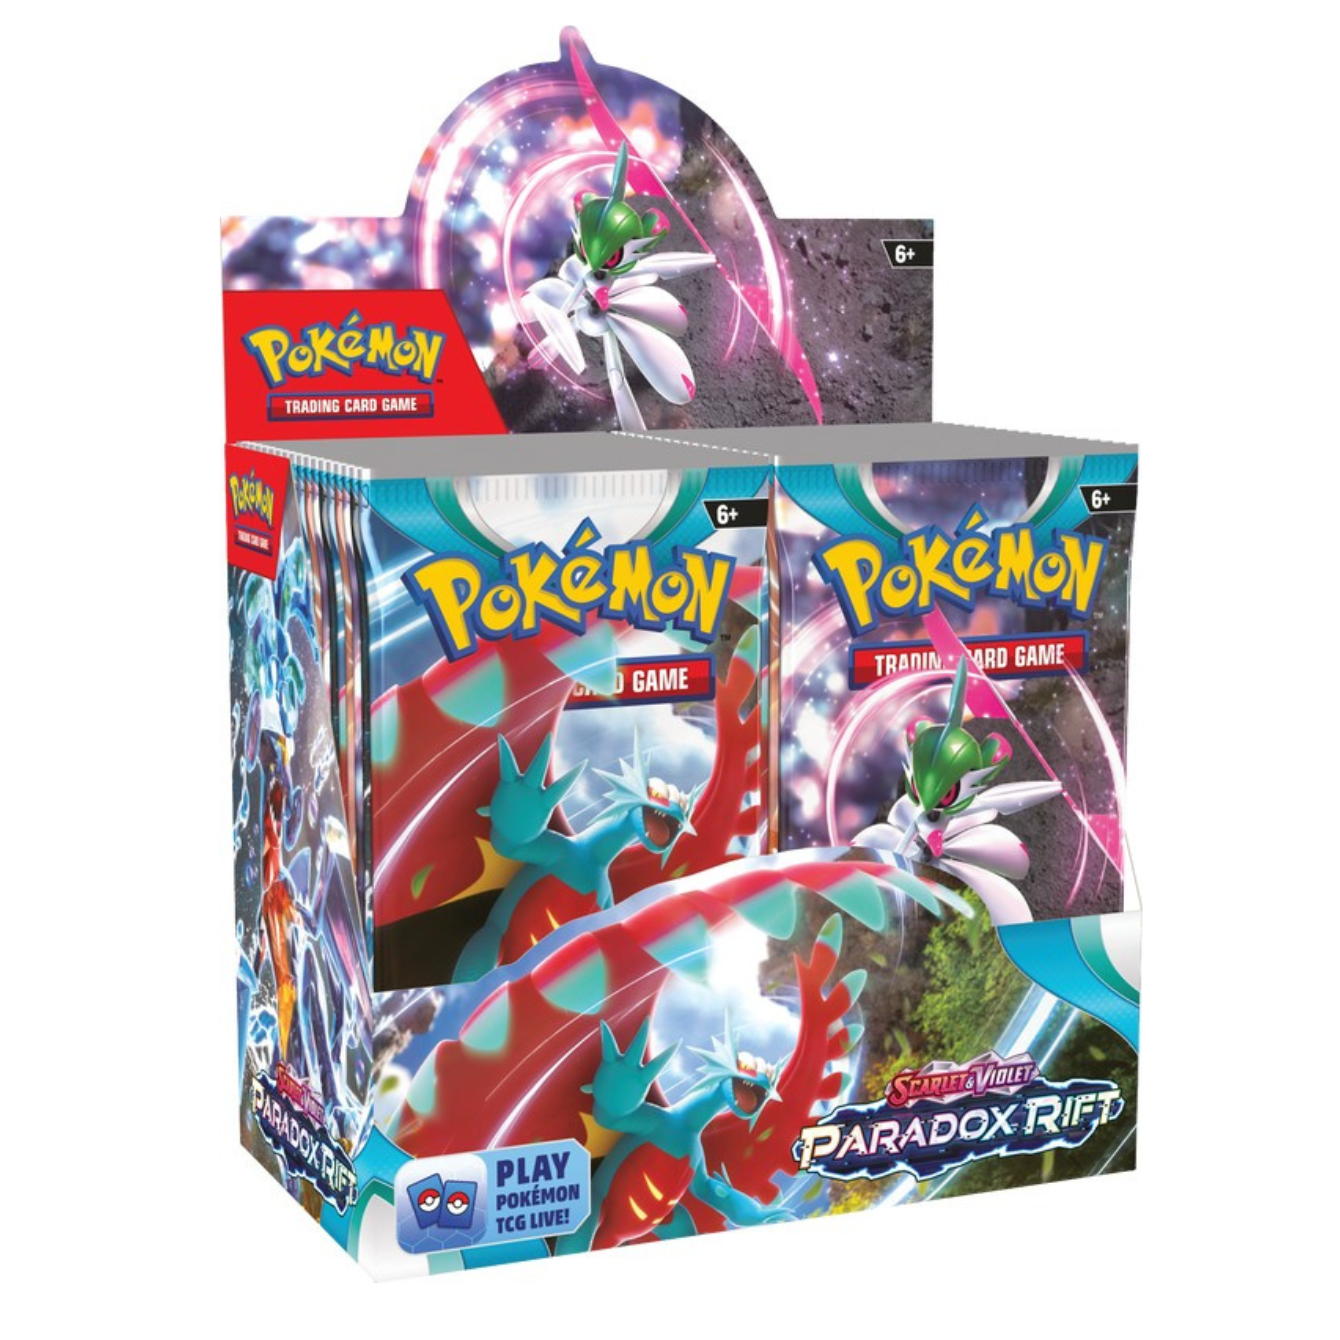 Pokemon Scarlet and Violet 4 Paradox Rift Booster